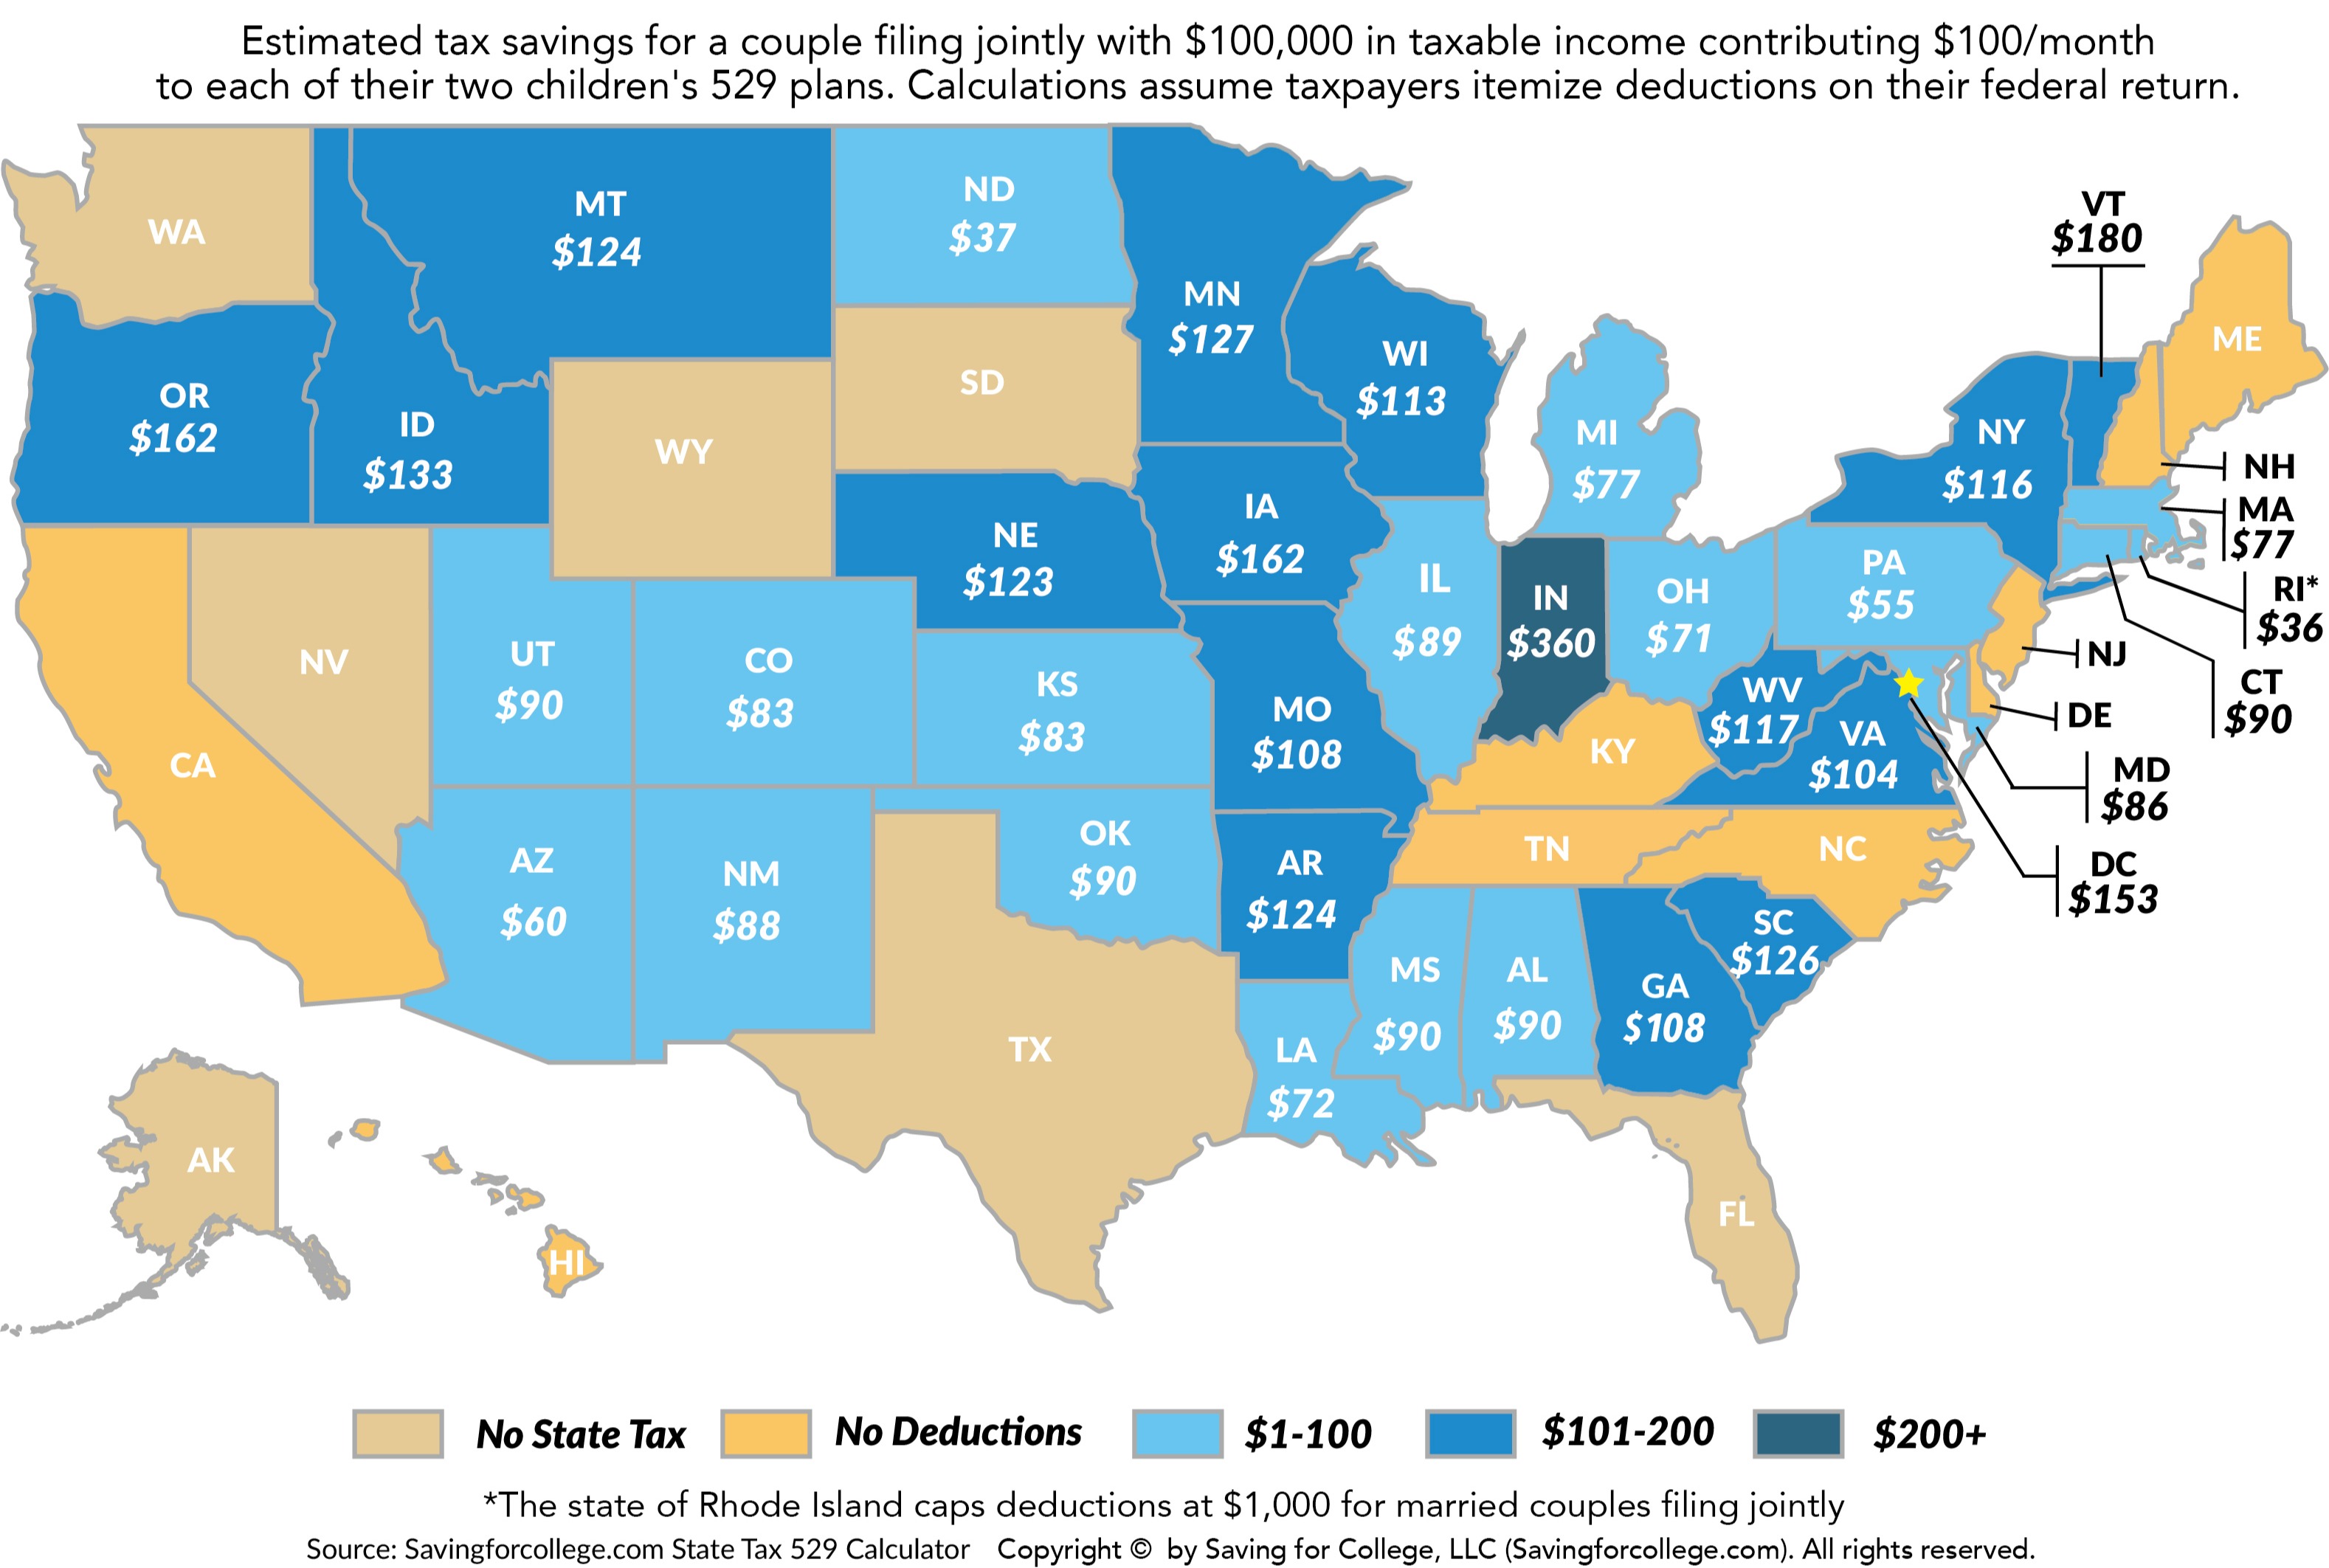 How Much Is Your State's 529 Plan Tax Deduction Really Worth?